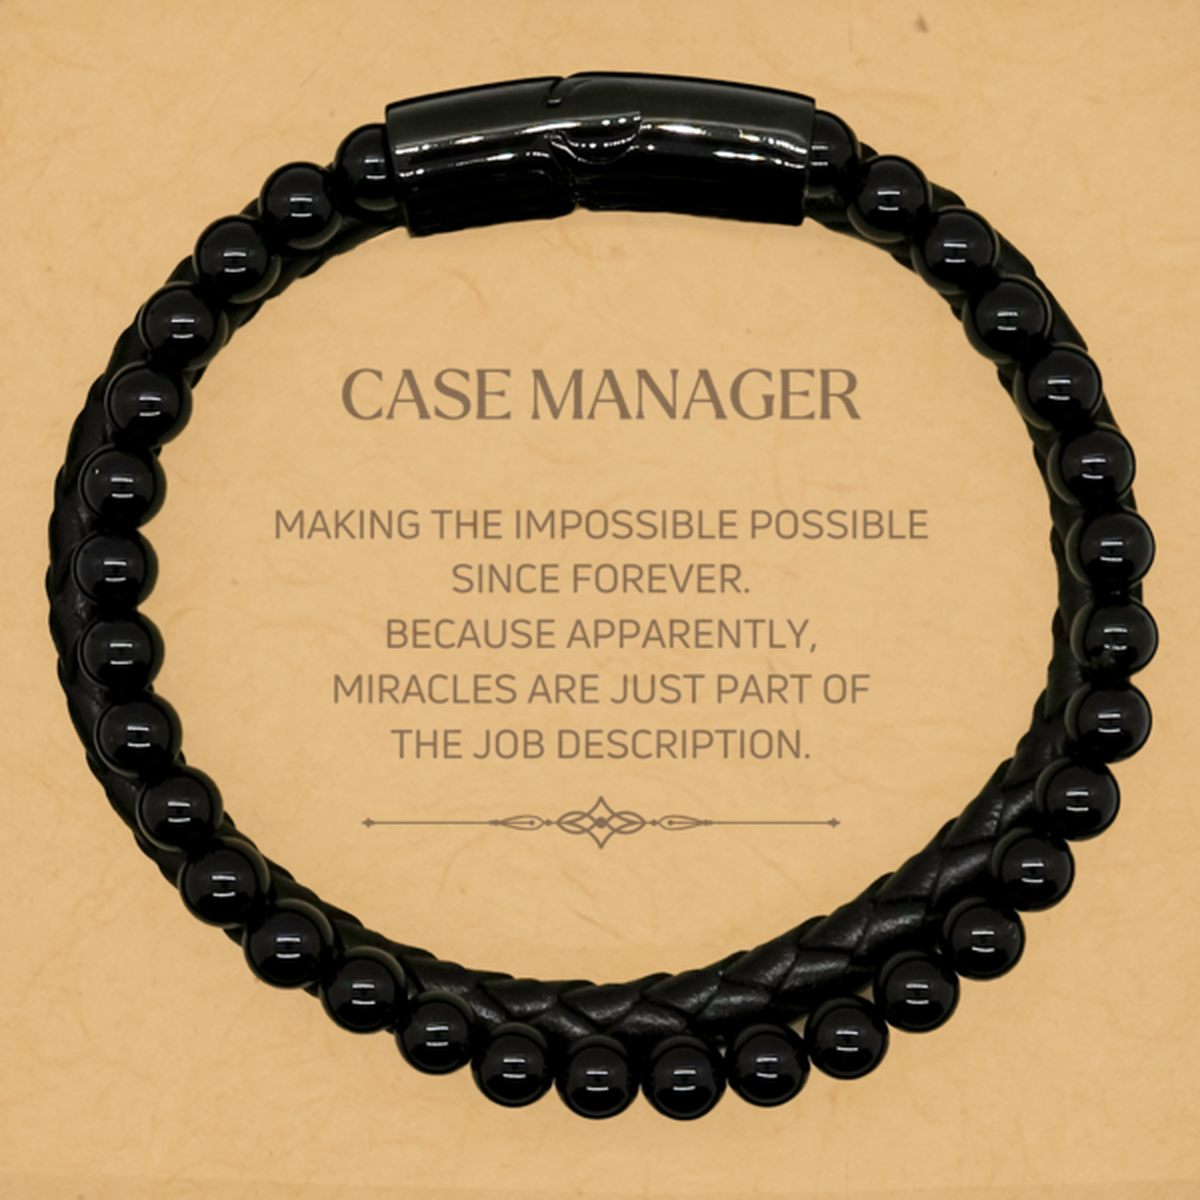 Funny Case Manager Gifts, Miracles are just part of the job description, Inspirational Birthday Stone Leather Bracelets For Case Manager, Men, Women, Coworkers, Friends, Boss